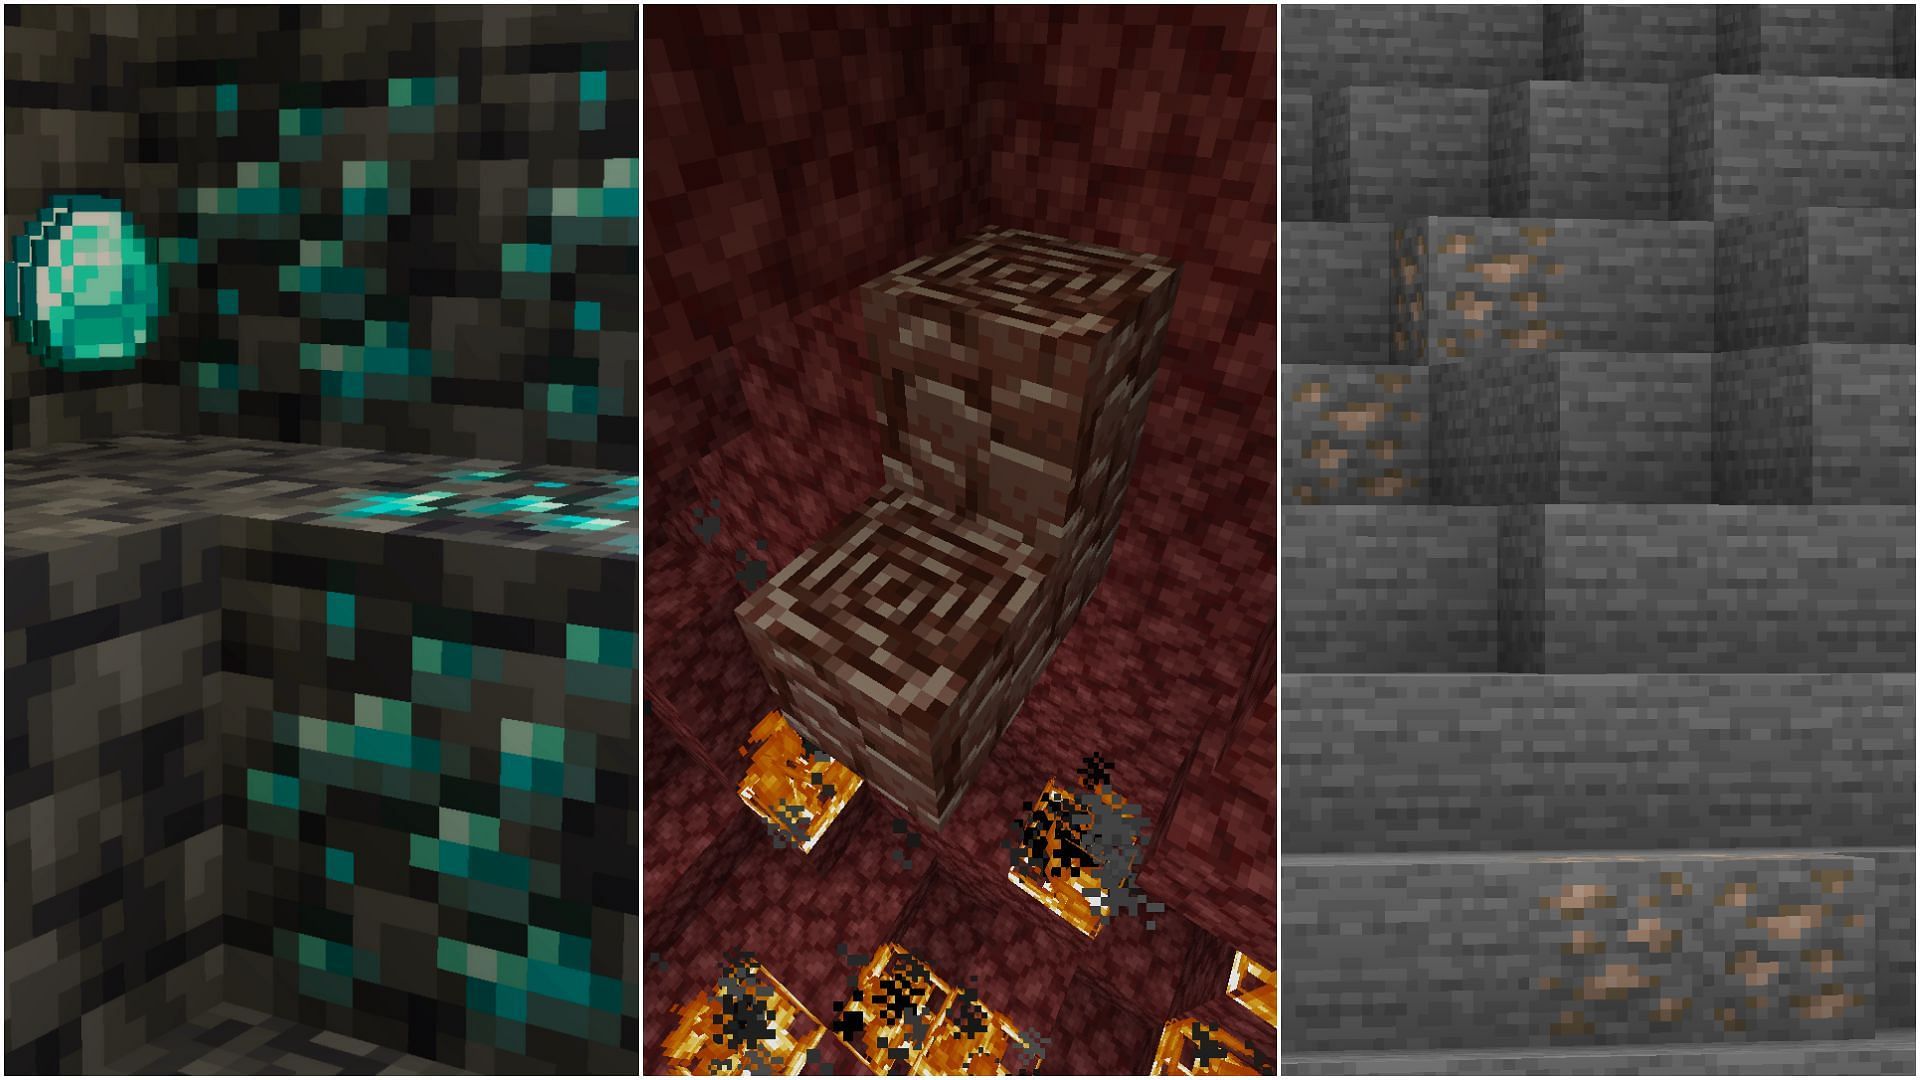 Minecraft - What Is the Best Y Level For Finding Netherite